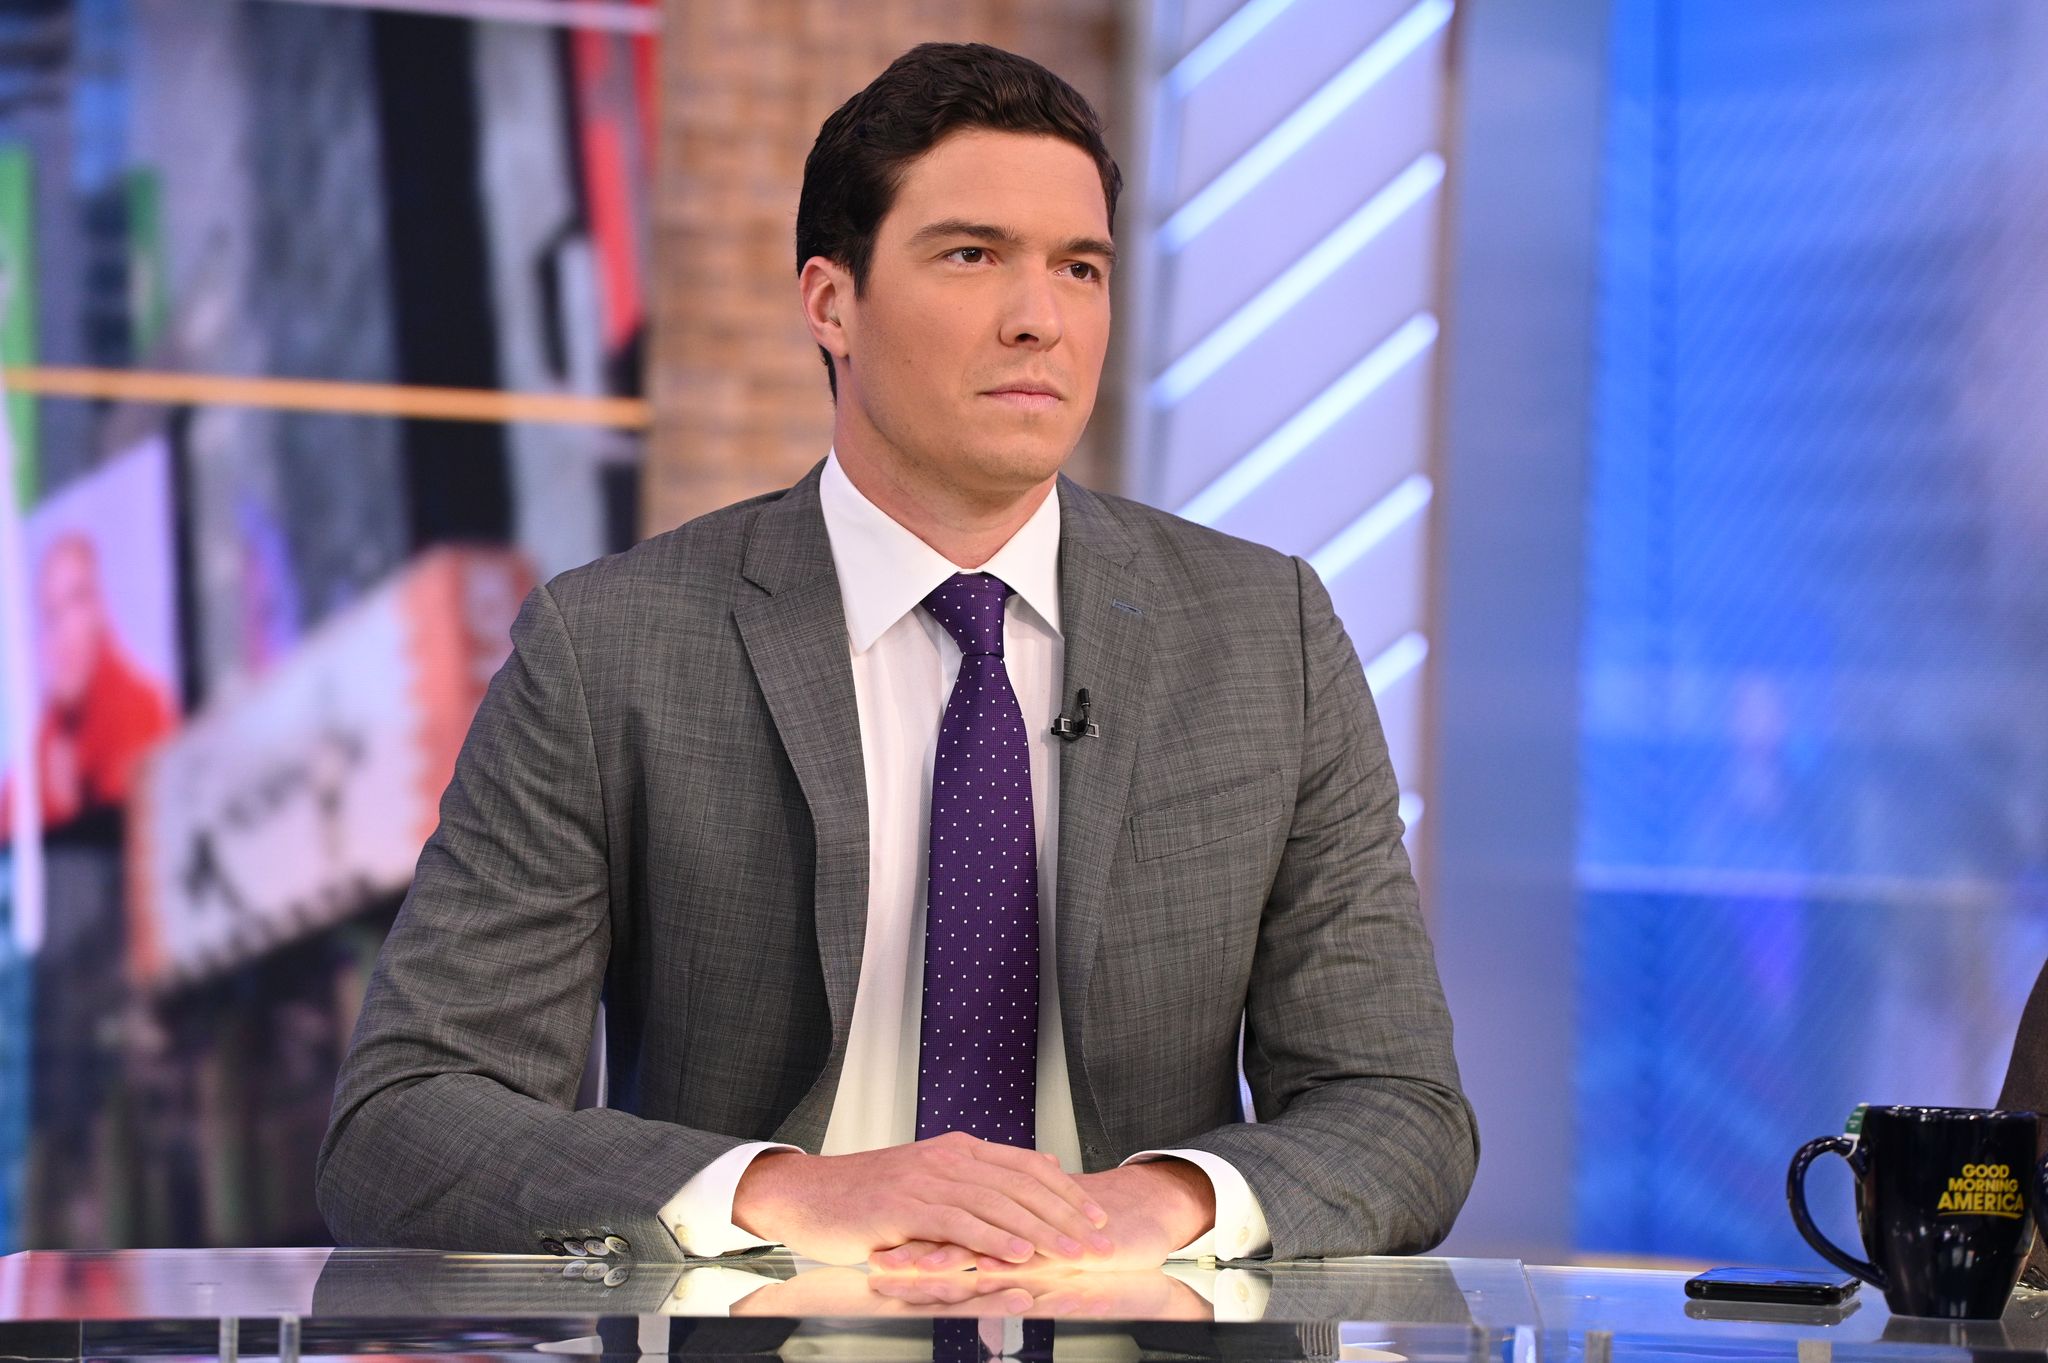 Will Reeve on ABC's "Good Morning America" on January 17, 2020. | Source: Getty Images